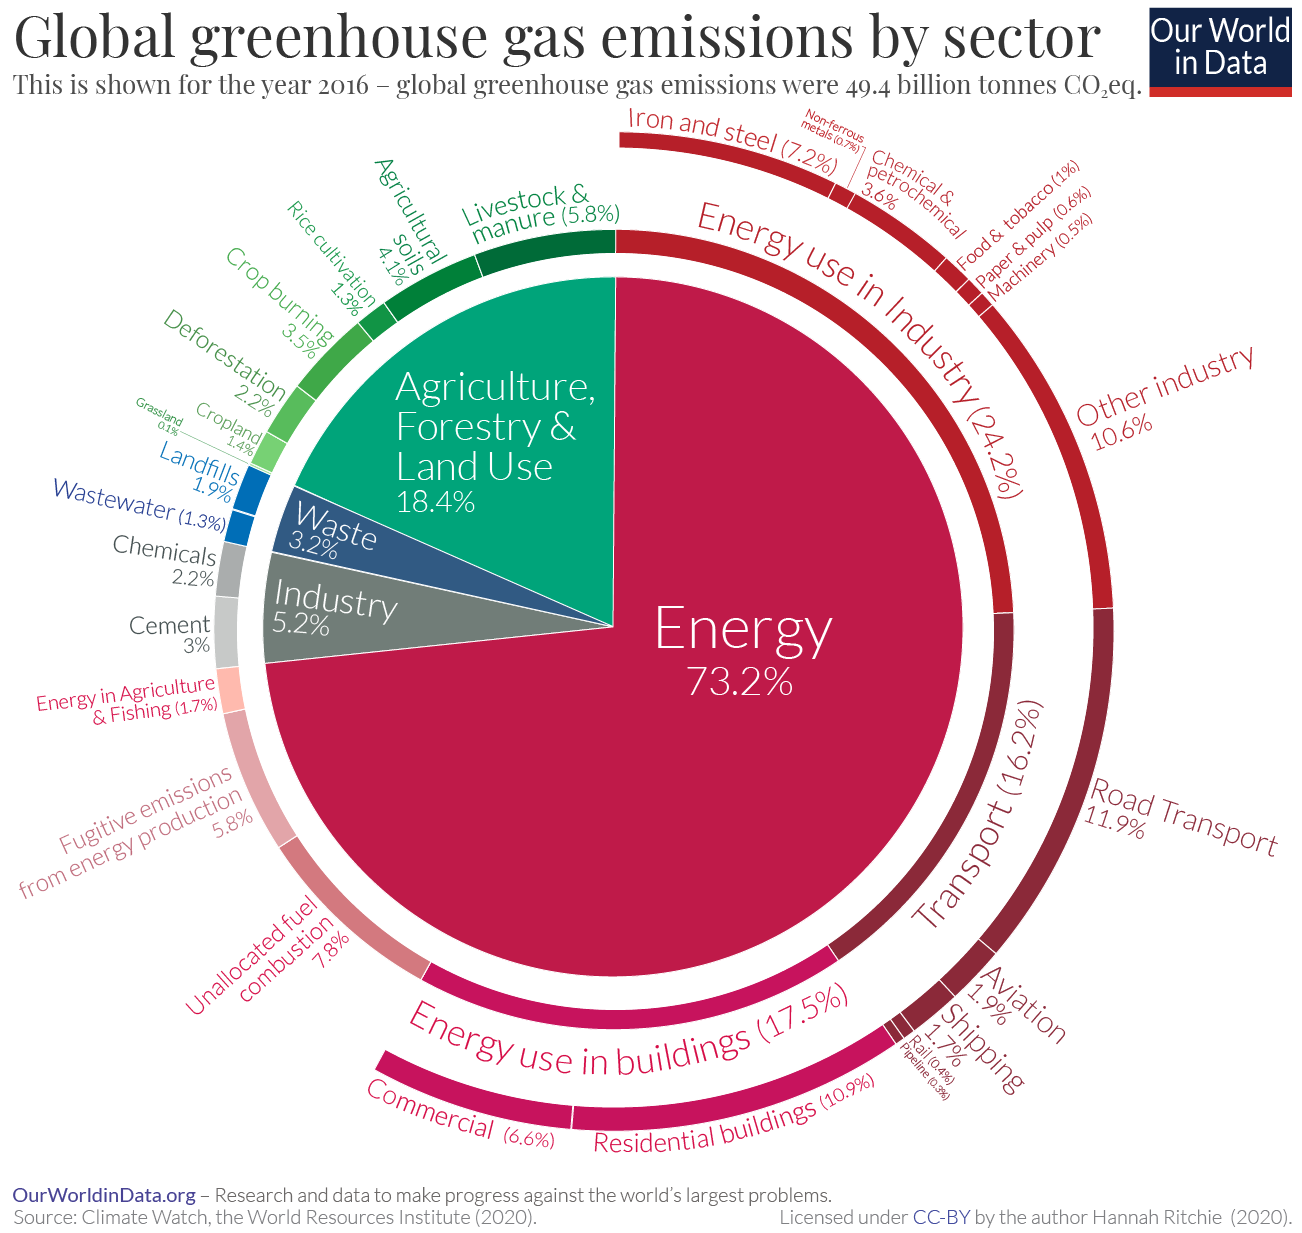 pie chart showing emissions by sector in the U.S.